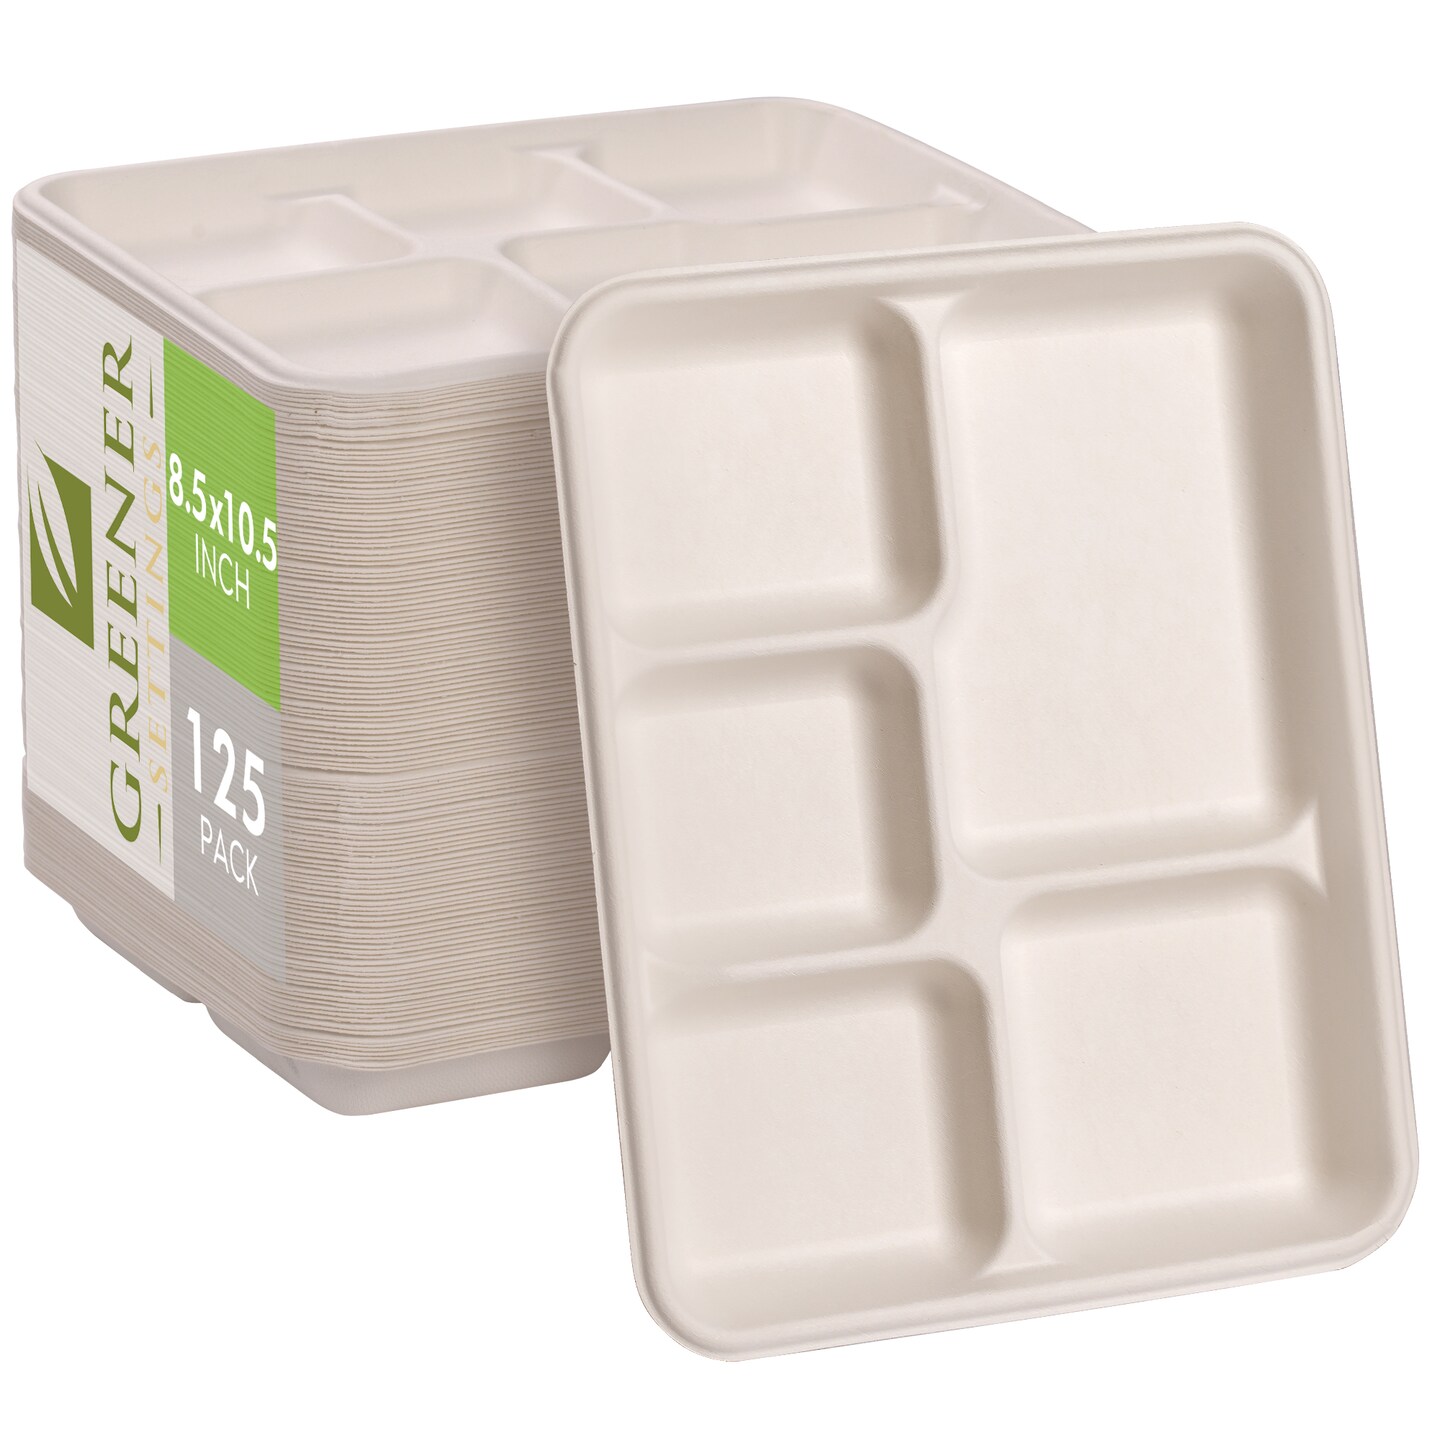 Disposable Food Trays with Compartments